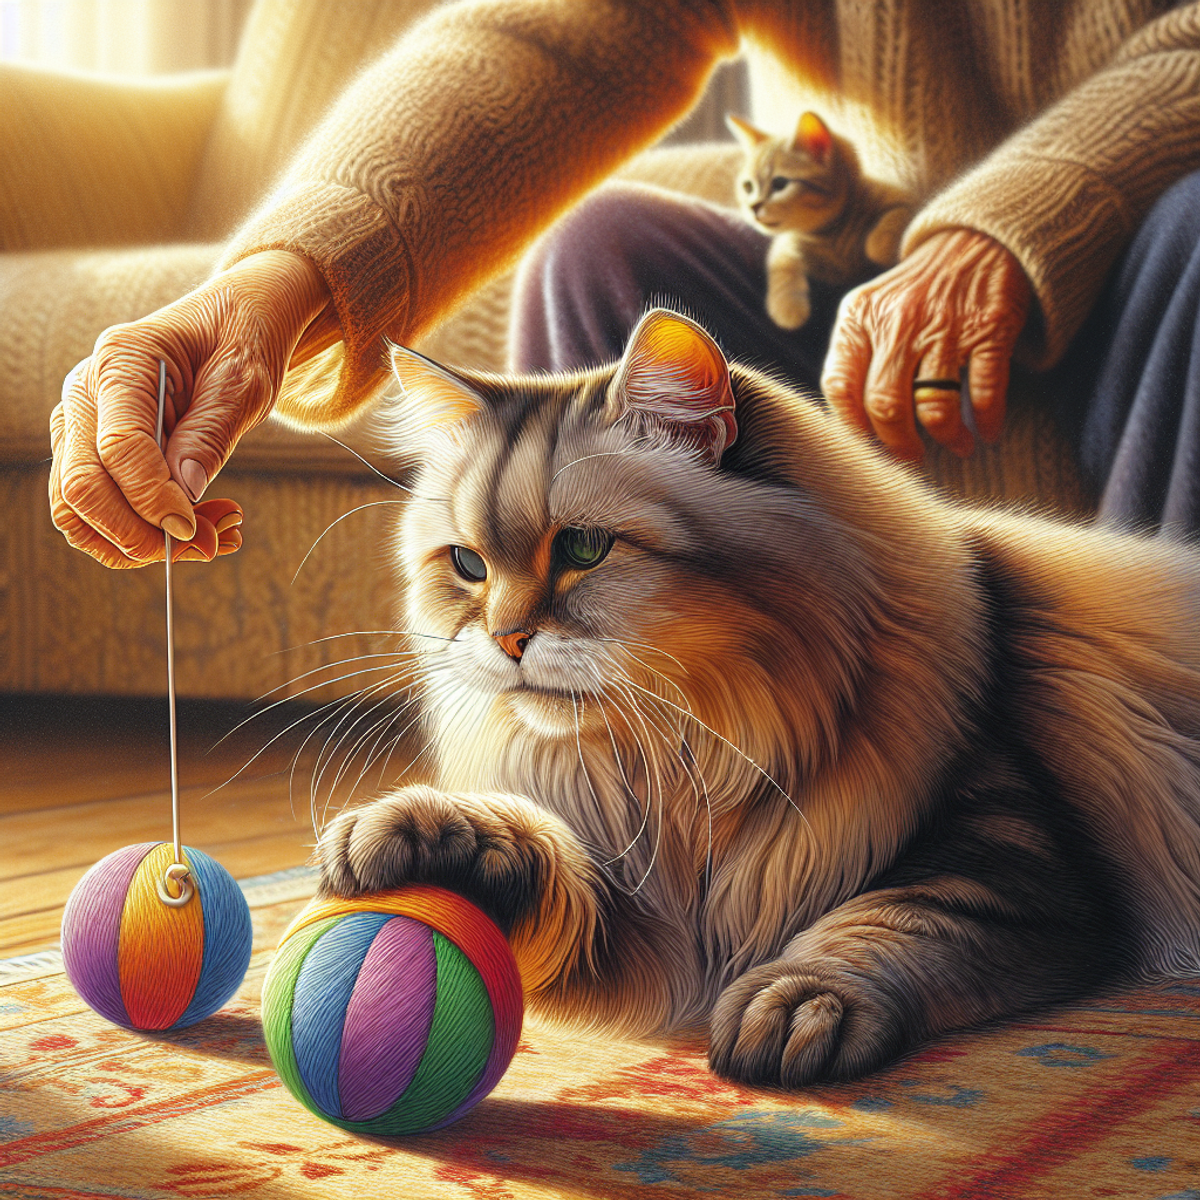 A senior cat with gray and white fur playing with a multicolored ball in a cozy living room.